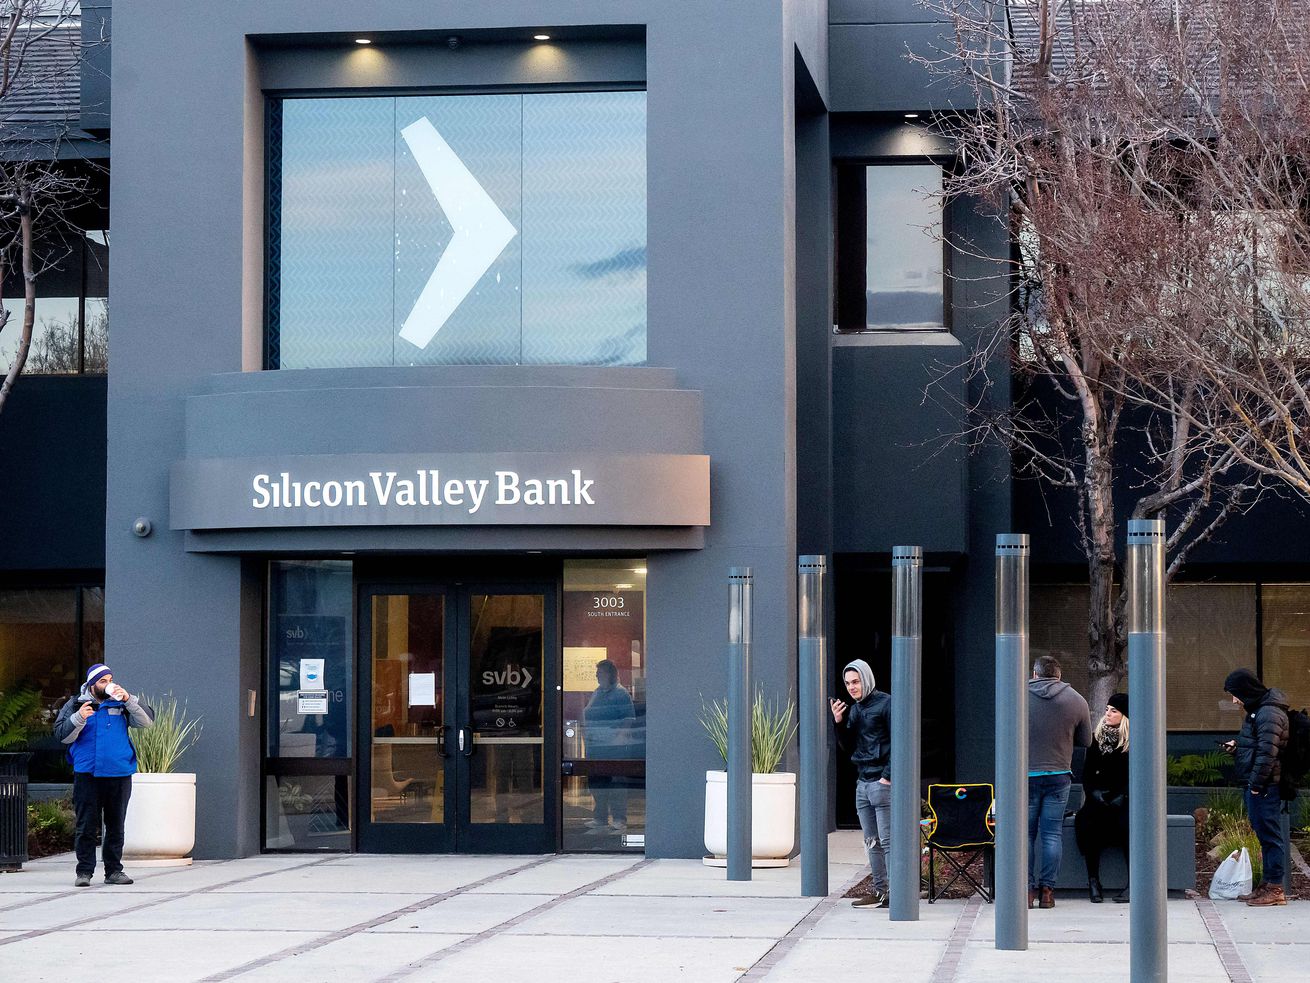 Silicon Valley Bank customers line up before the opening of a branch at SVBs headquarters in Santa Clara, California, on March 13, 2023.